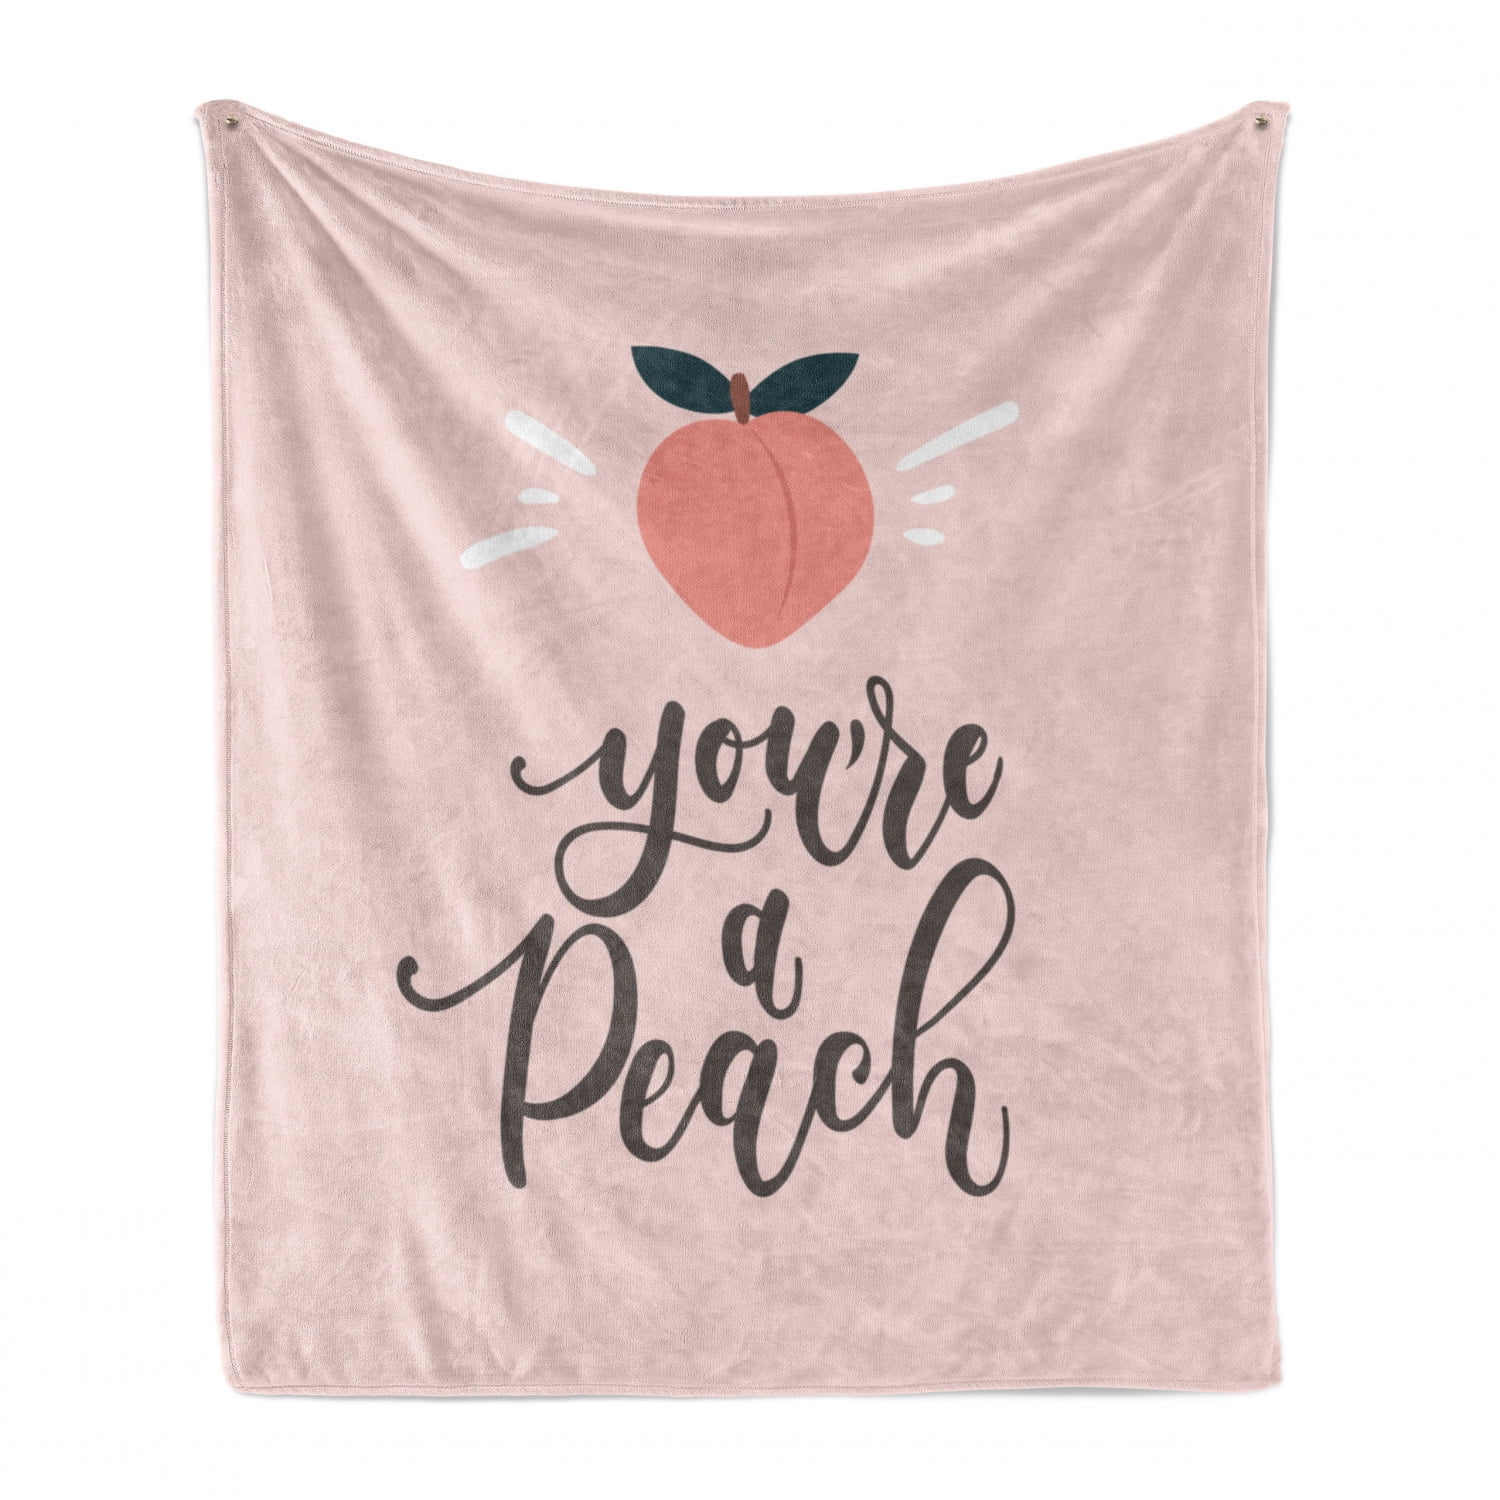 50 x 60 Illustration of Fruits Drawn by Hand Peaches Apples Organic Healthy Food Ambesonne Sketch Soft Flannel Fleece Throw Blanket Cozy Plush for Indoor and Outdoor Use Cinnamon and Peach 